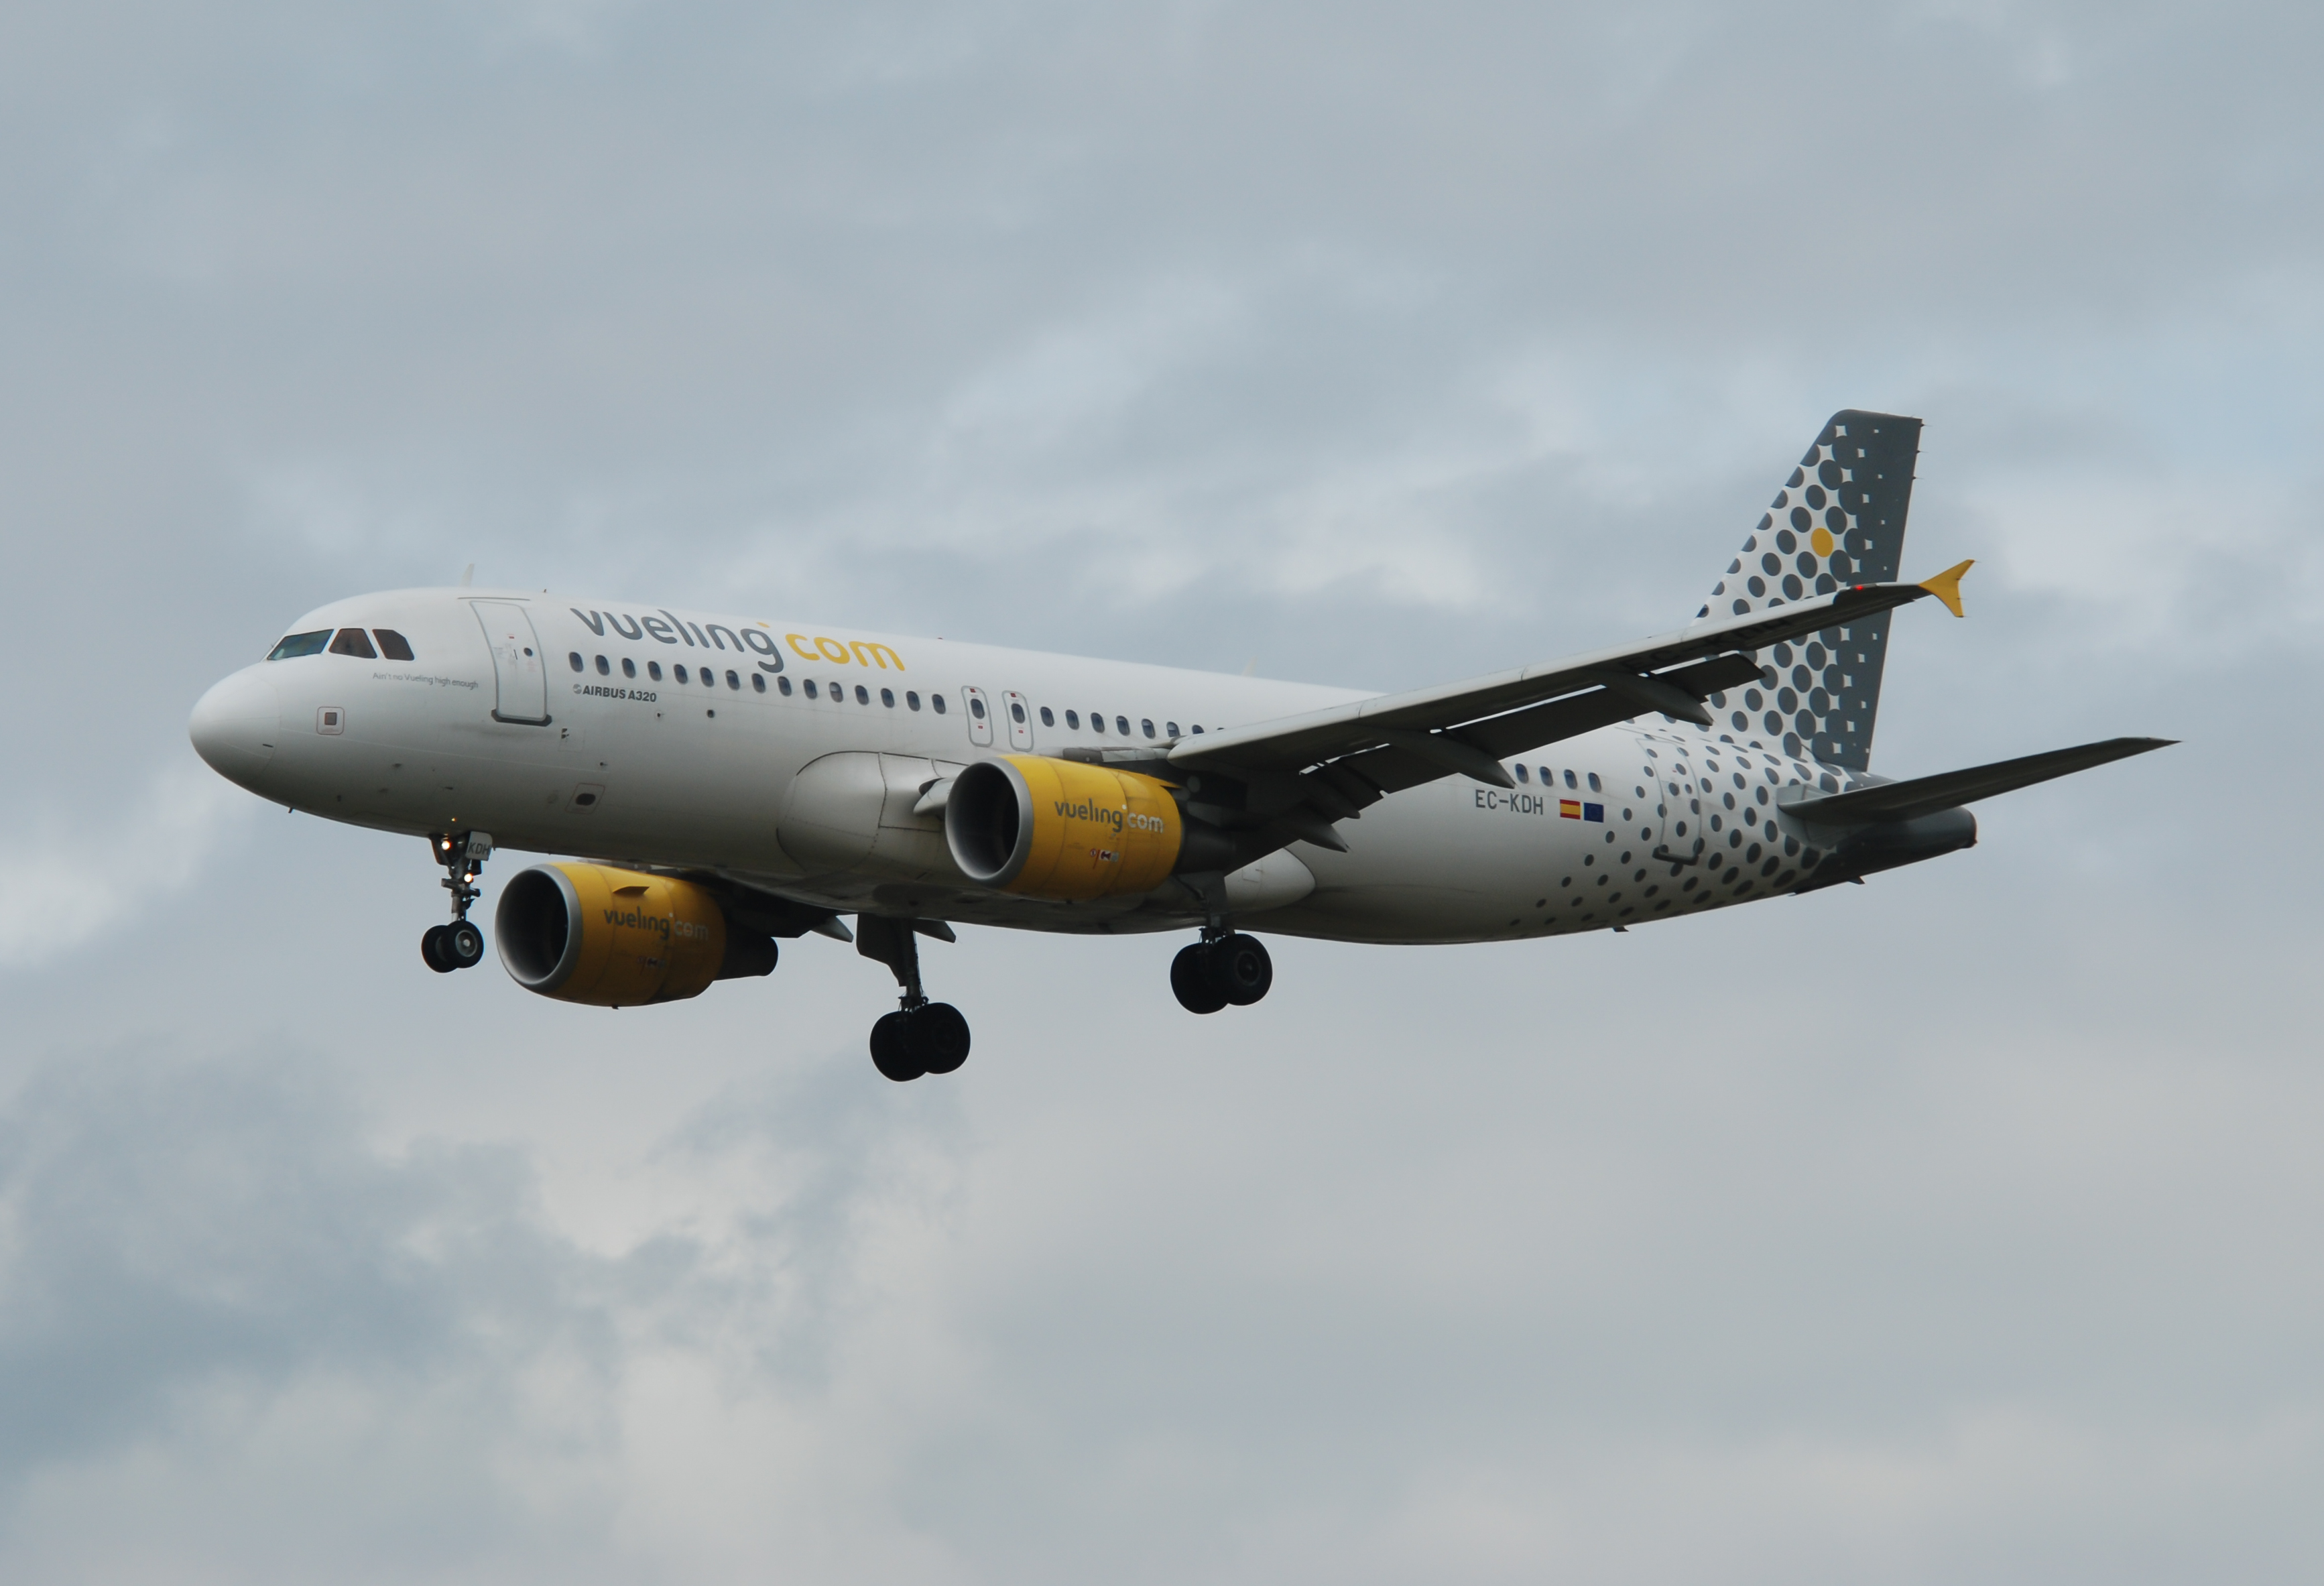 EC-KDH/ECKDH Vueling Airlines Airbus A320-214 Photo by Ayronautica - AVSpotters.com